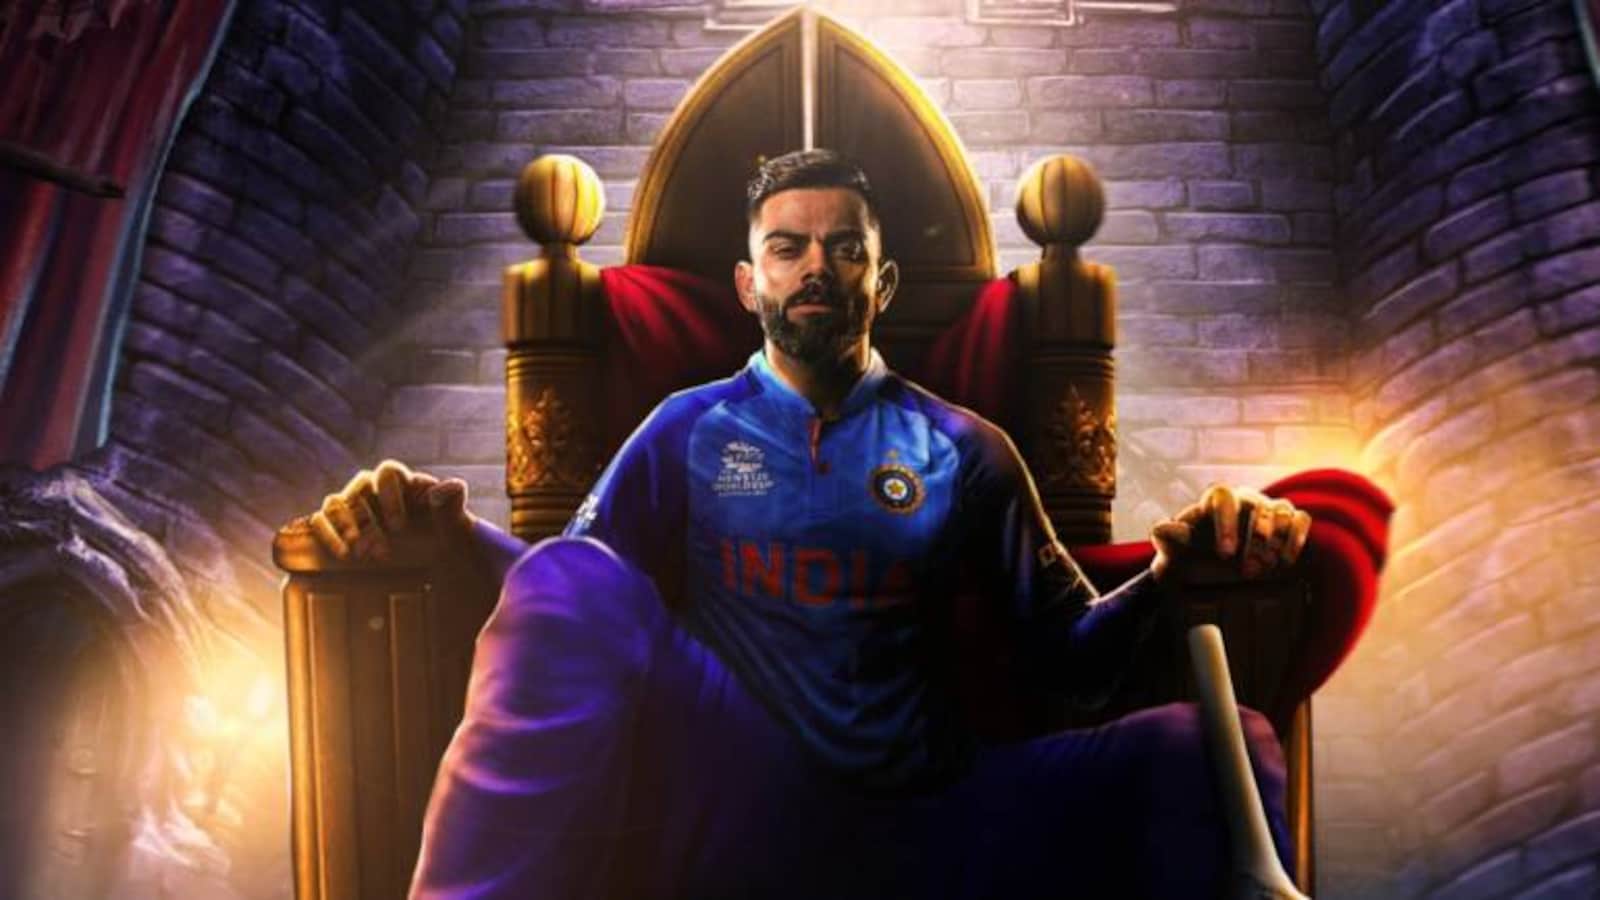 The King is back': Virat Kohli leads India to victory against Pakistan,  Twitter erupts in celebrations